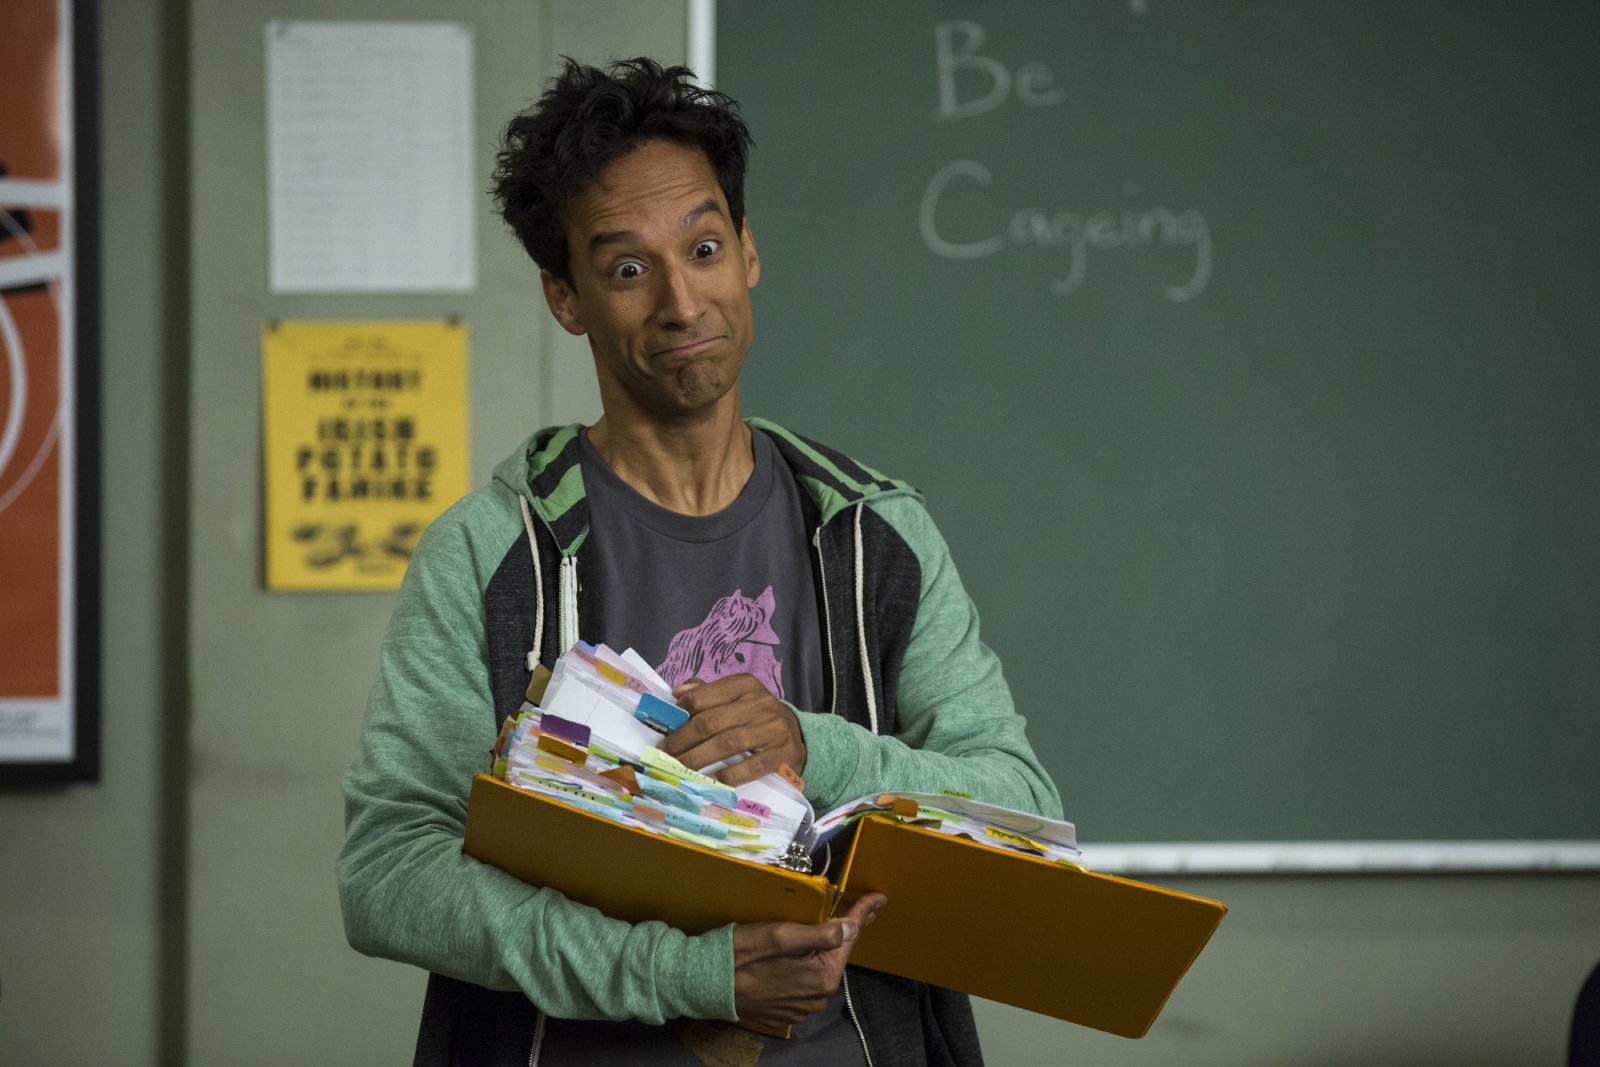 ‘Community’: How Old Was Danny Pudi When He Starred as Abed Nadir?